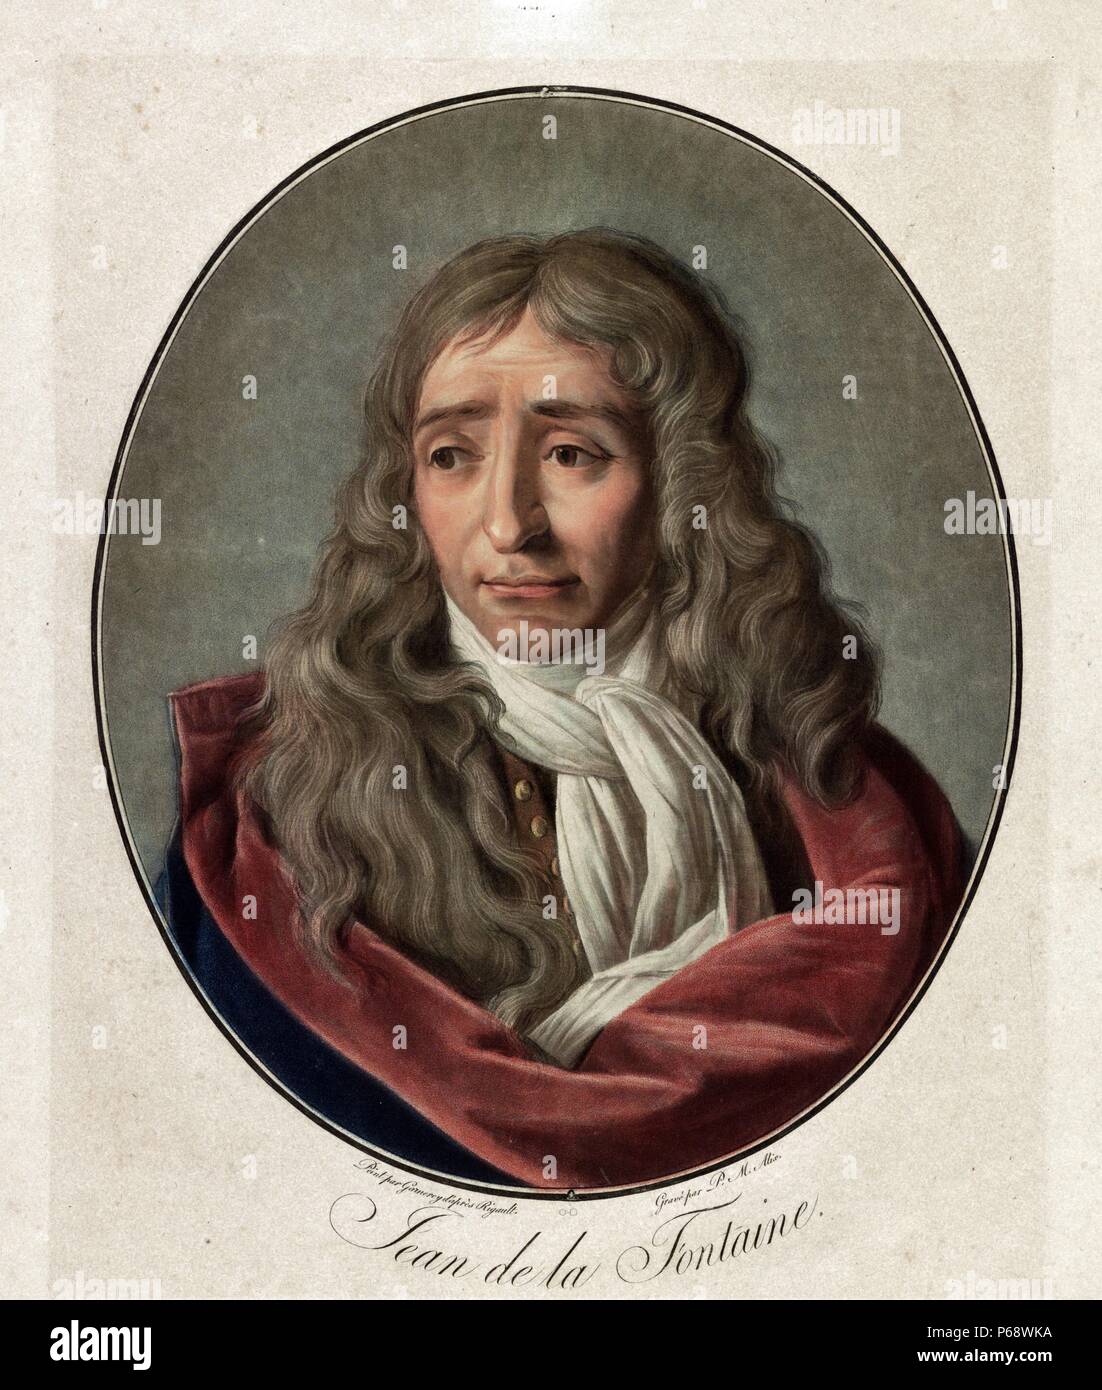 Jean de la Fontaine 1621-1695 French author. painted by Garneray 1762-1817 Stock Photo